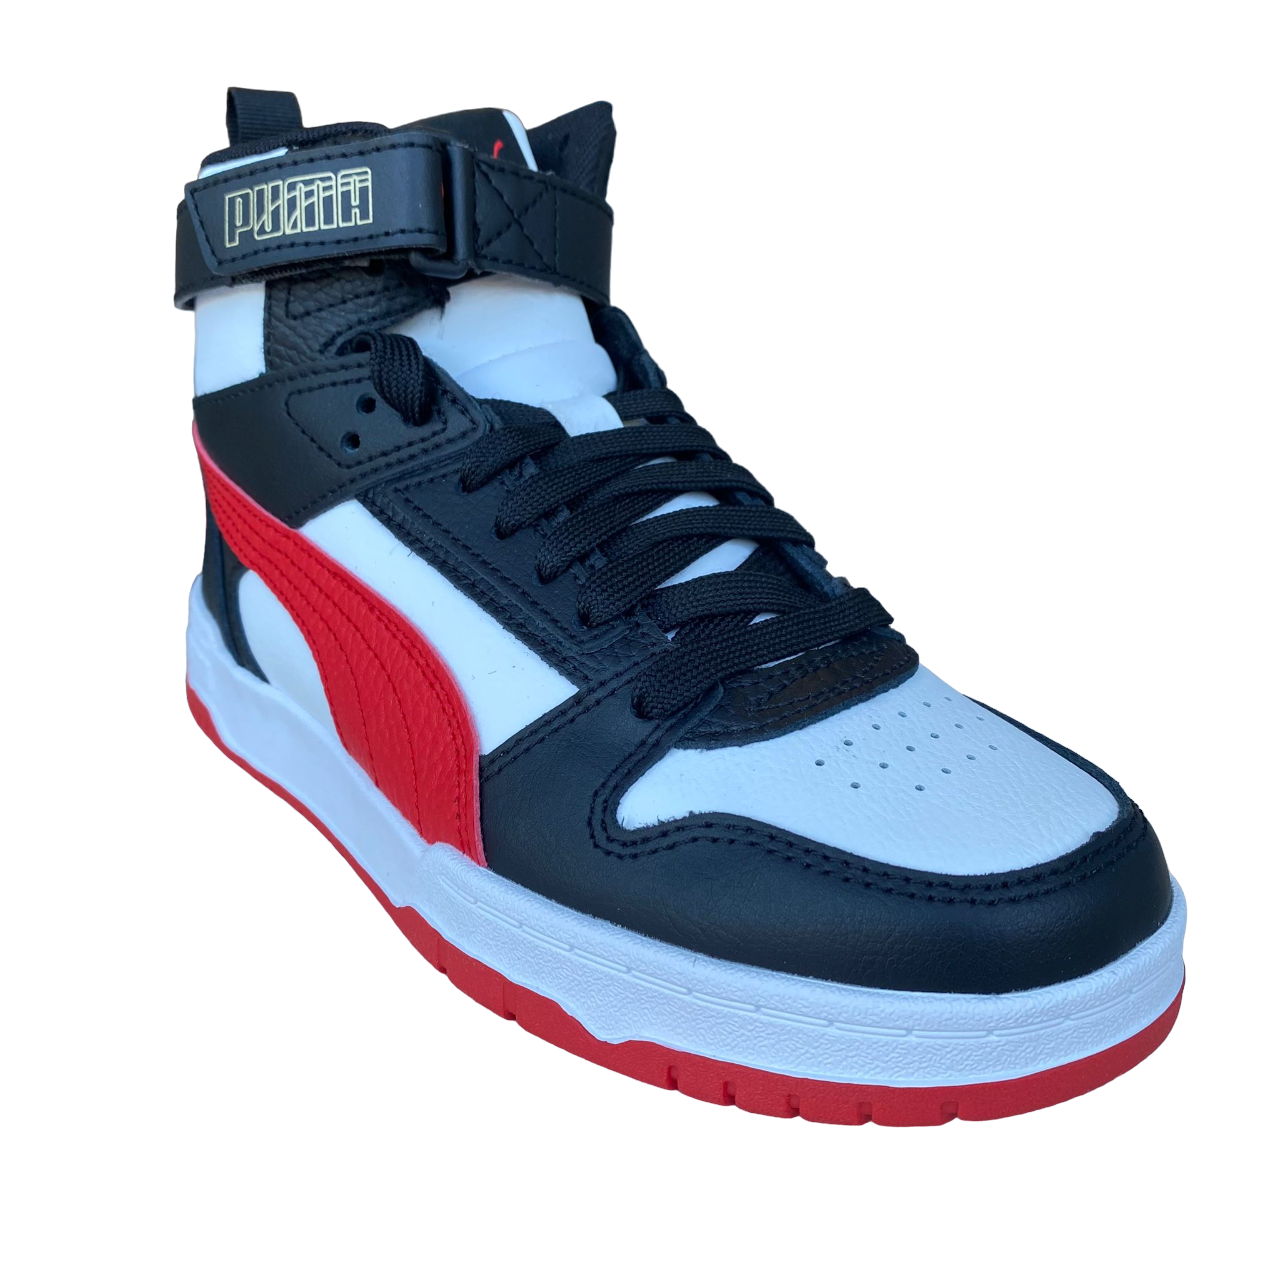 Puma boy&#39;s sneakers shoe RBD Game 386172 08 white-red-black-gold